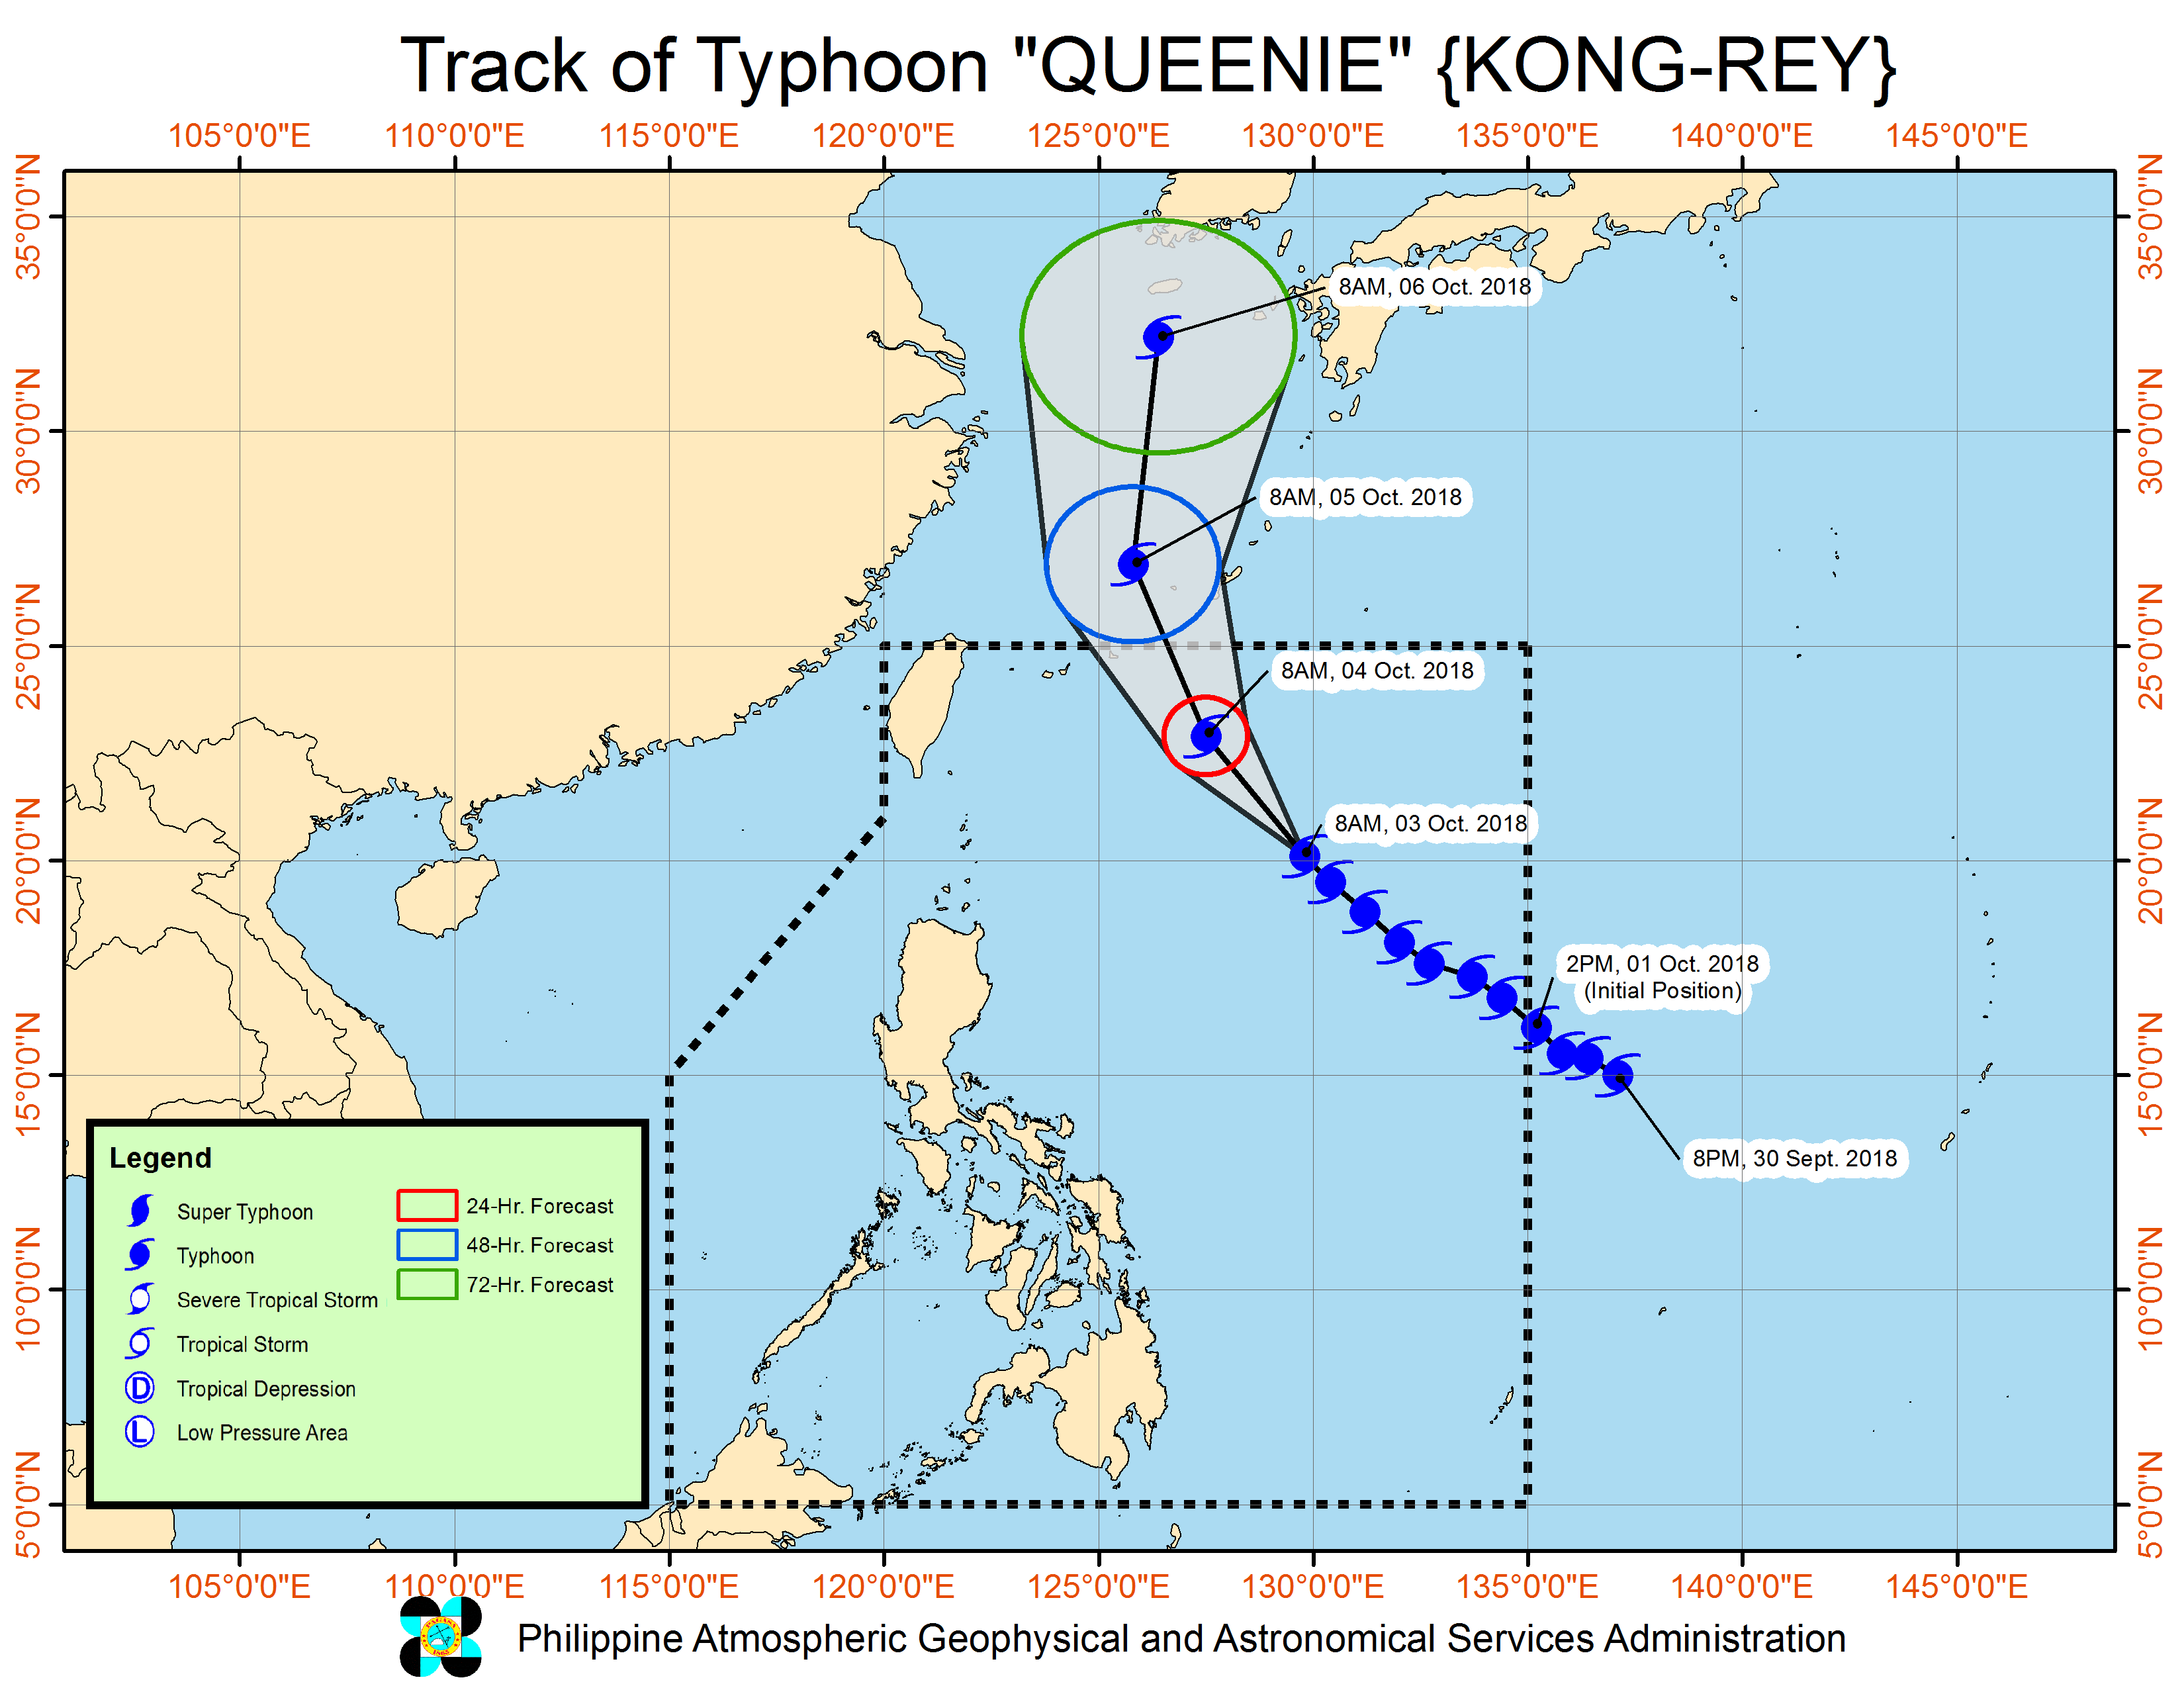 Forecast track of Typhoon Queenie (Kong-rey) as of October 3, 2018, 11 am. Image from PAGASA  